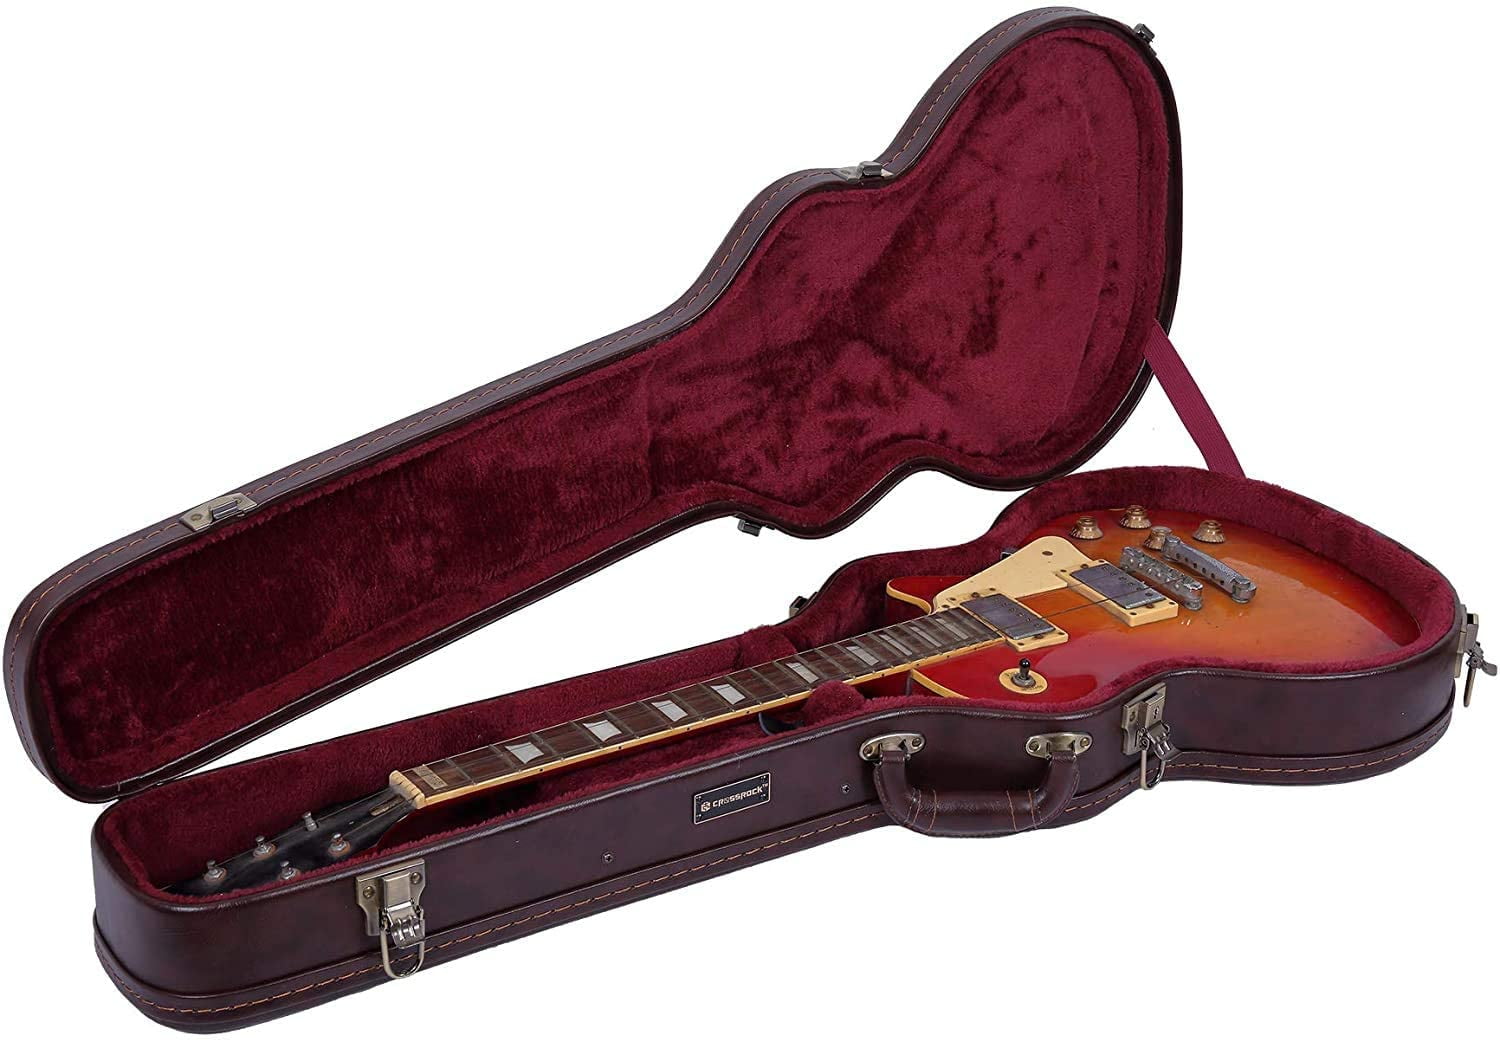 CRW600MATW Crossrock Deluxe Wooden Hardshell Case for A-style Mandolin-Tweed 